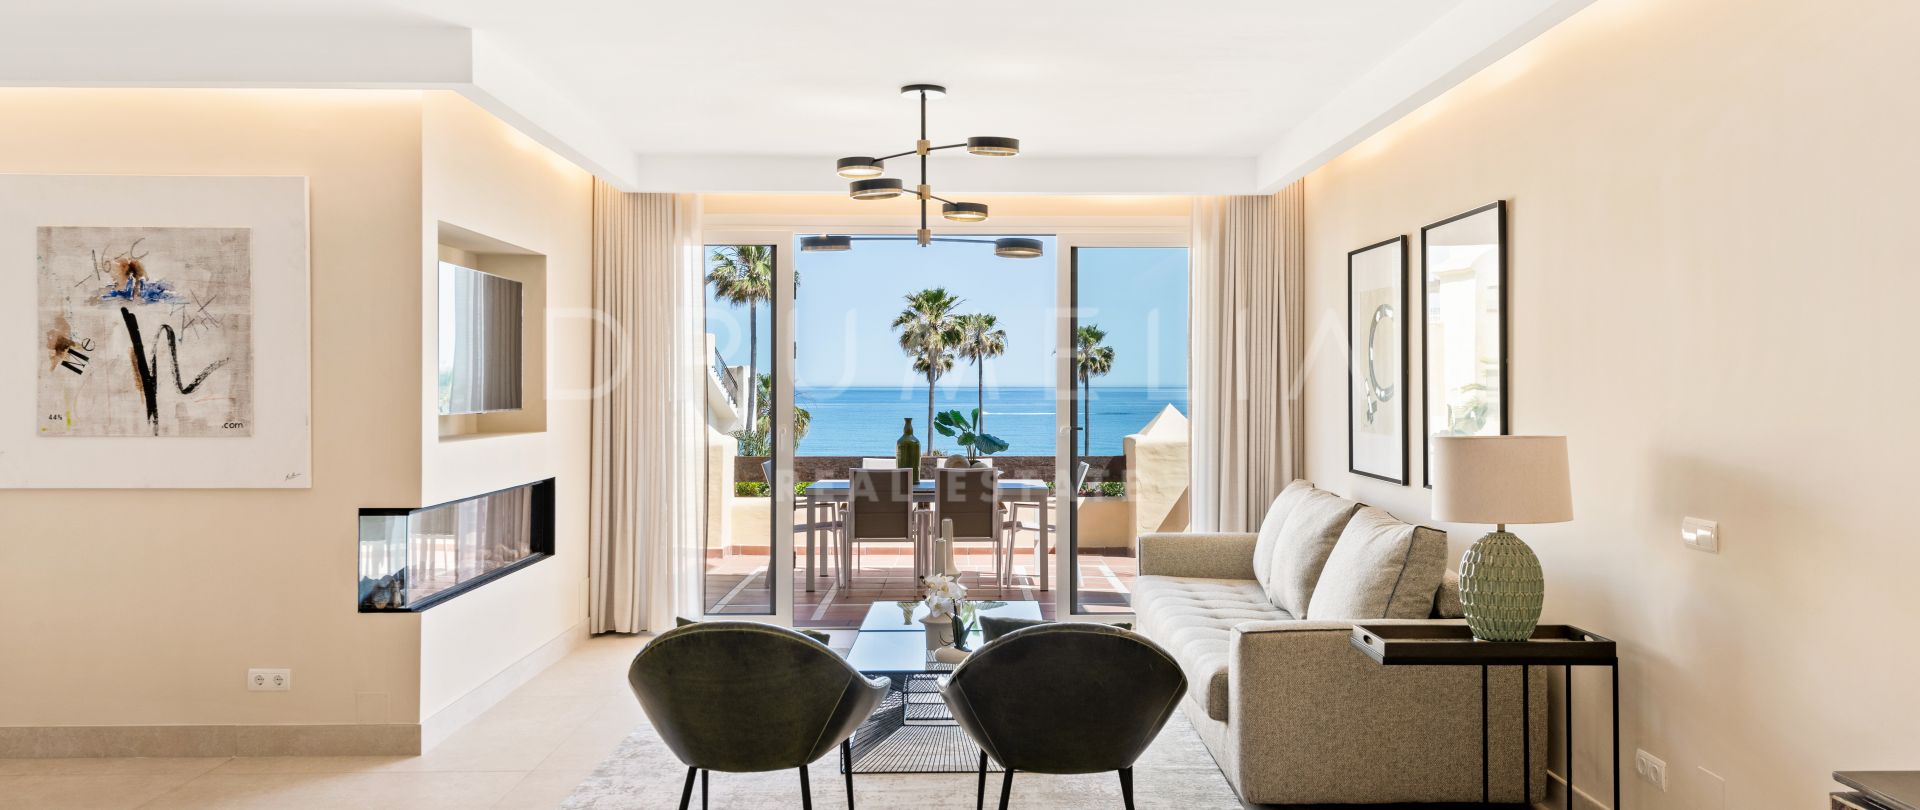 Renovated Beachfront Penthouse with a Wow- Factor in El Velerin, Estepona